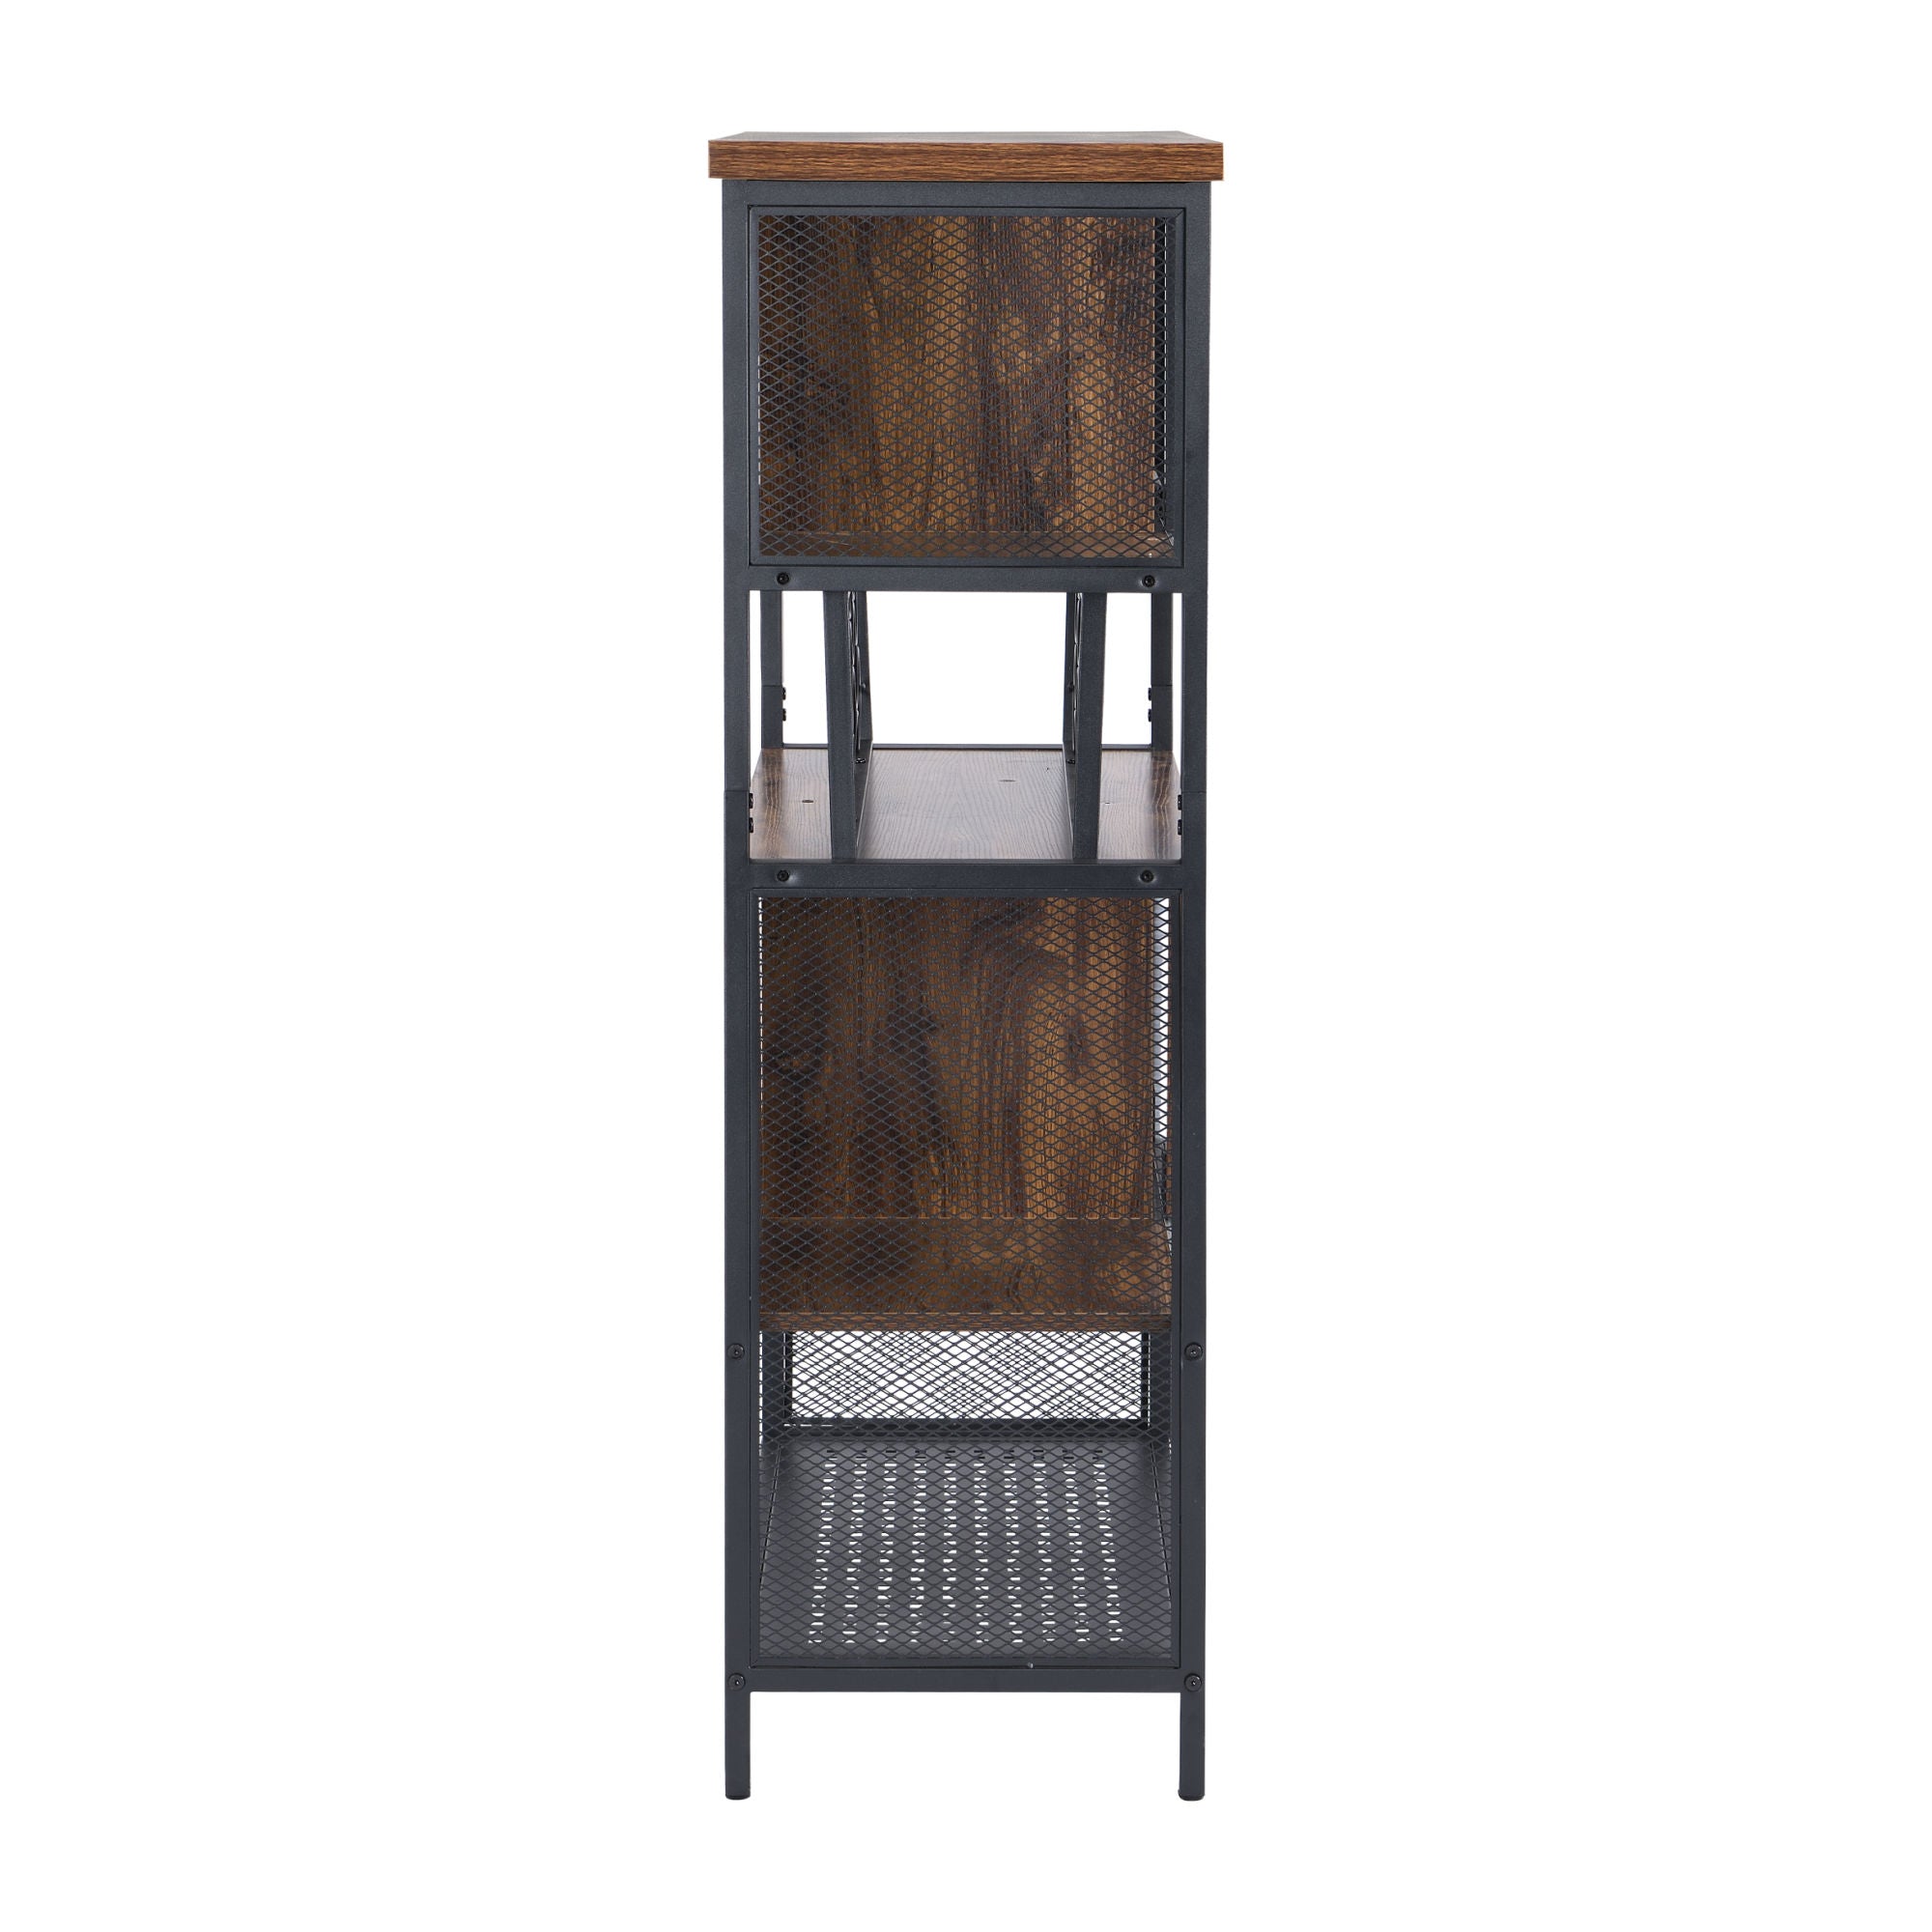 An Industrial Bar Cabinet with Wine Rack for Liquor and Glasses; Wood and Metal Cabinet for Home Kitchen Storage Cabinet with shelves.